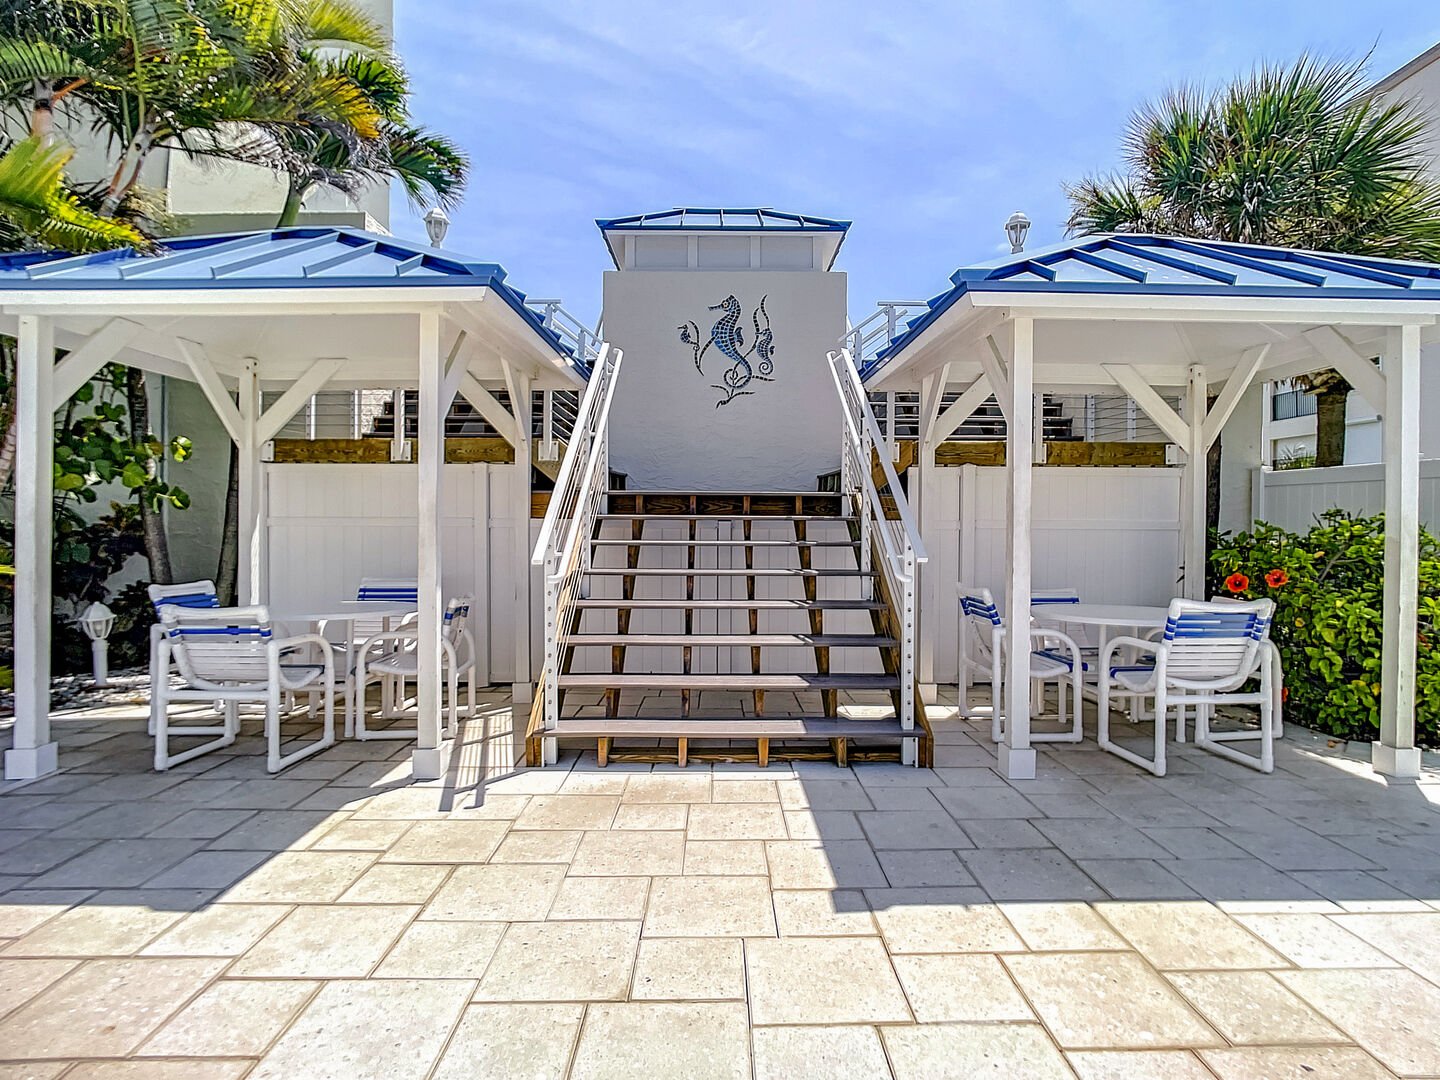 Covered area with tables and chairs by the pool area.